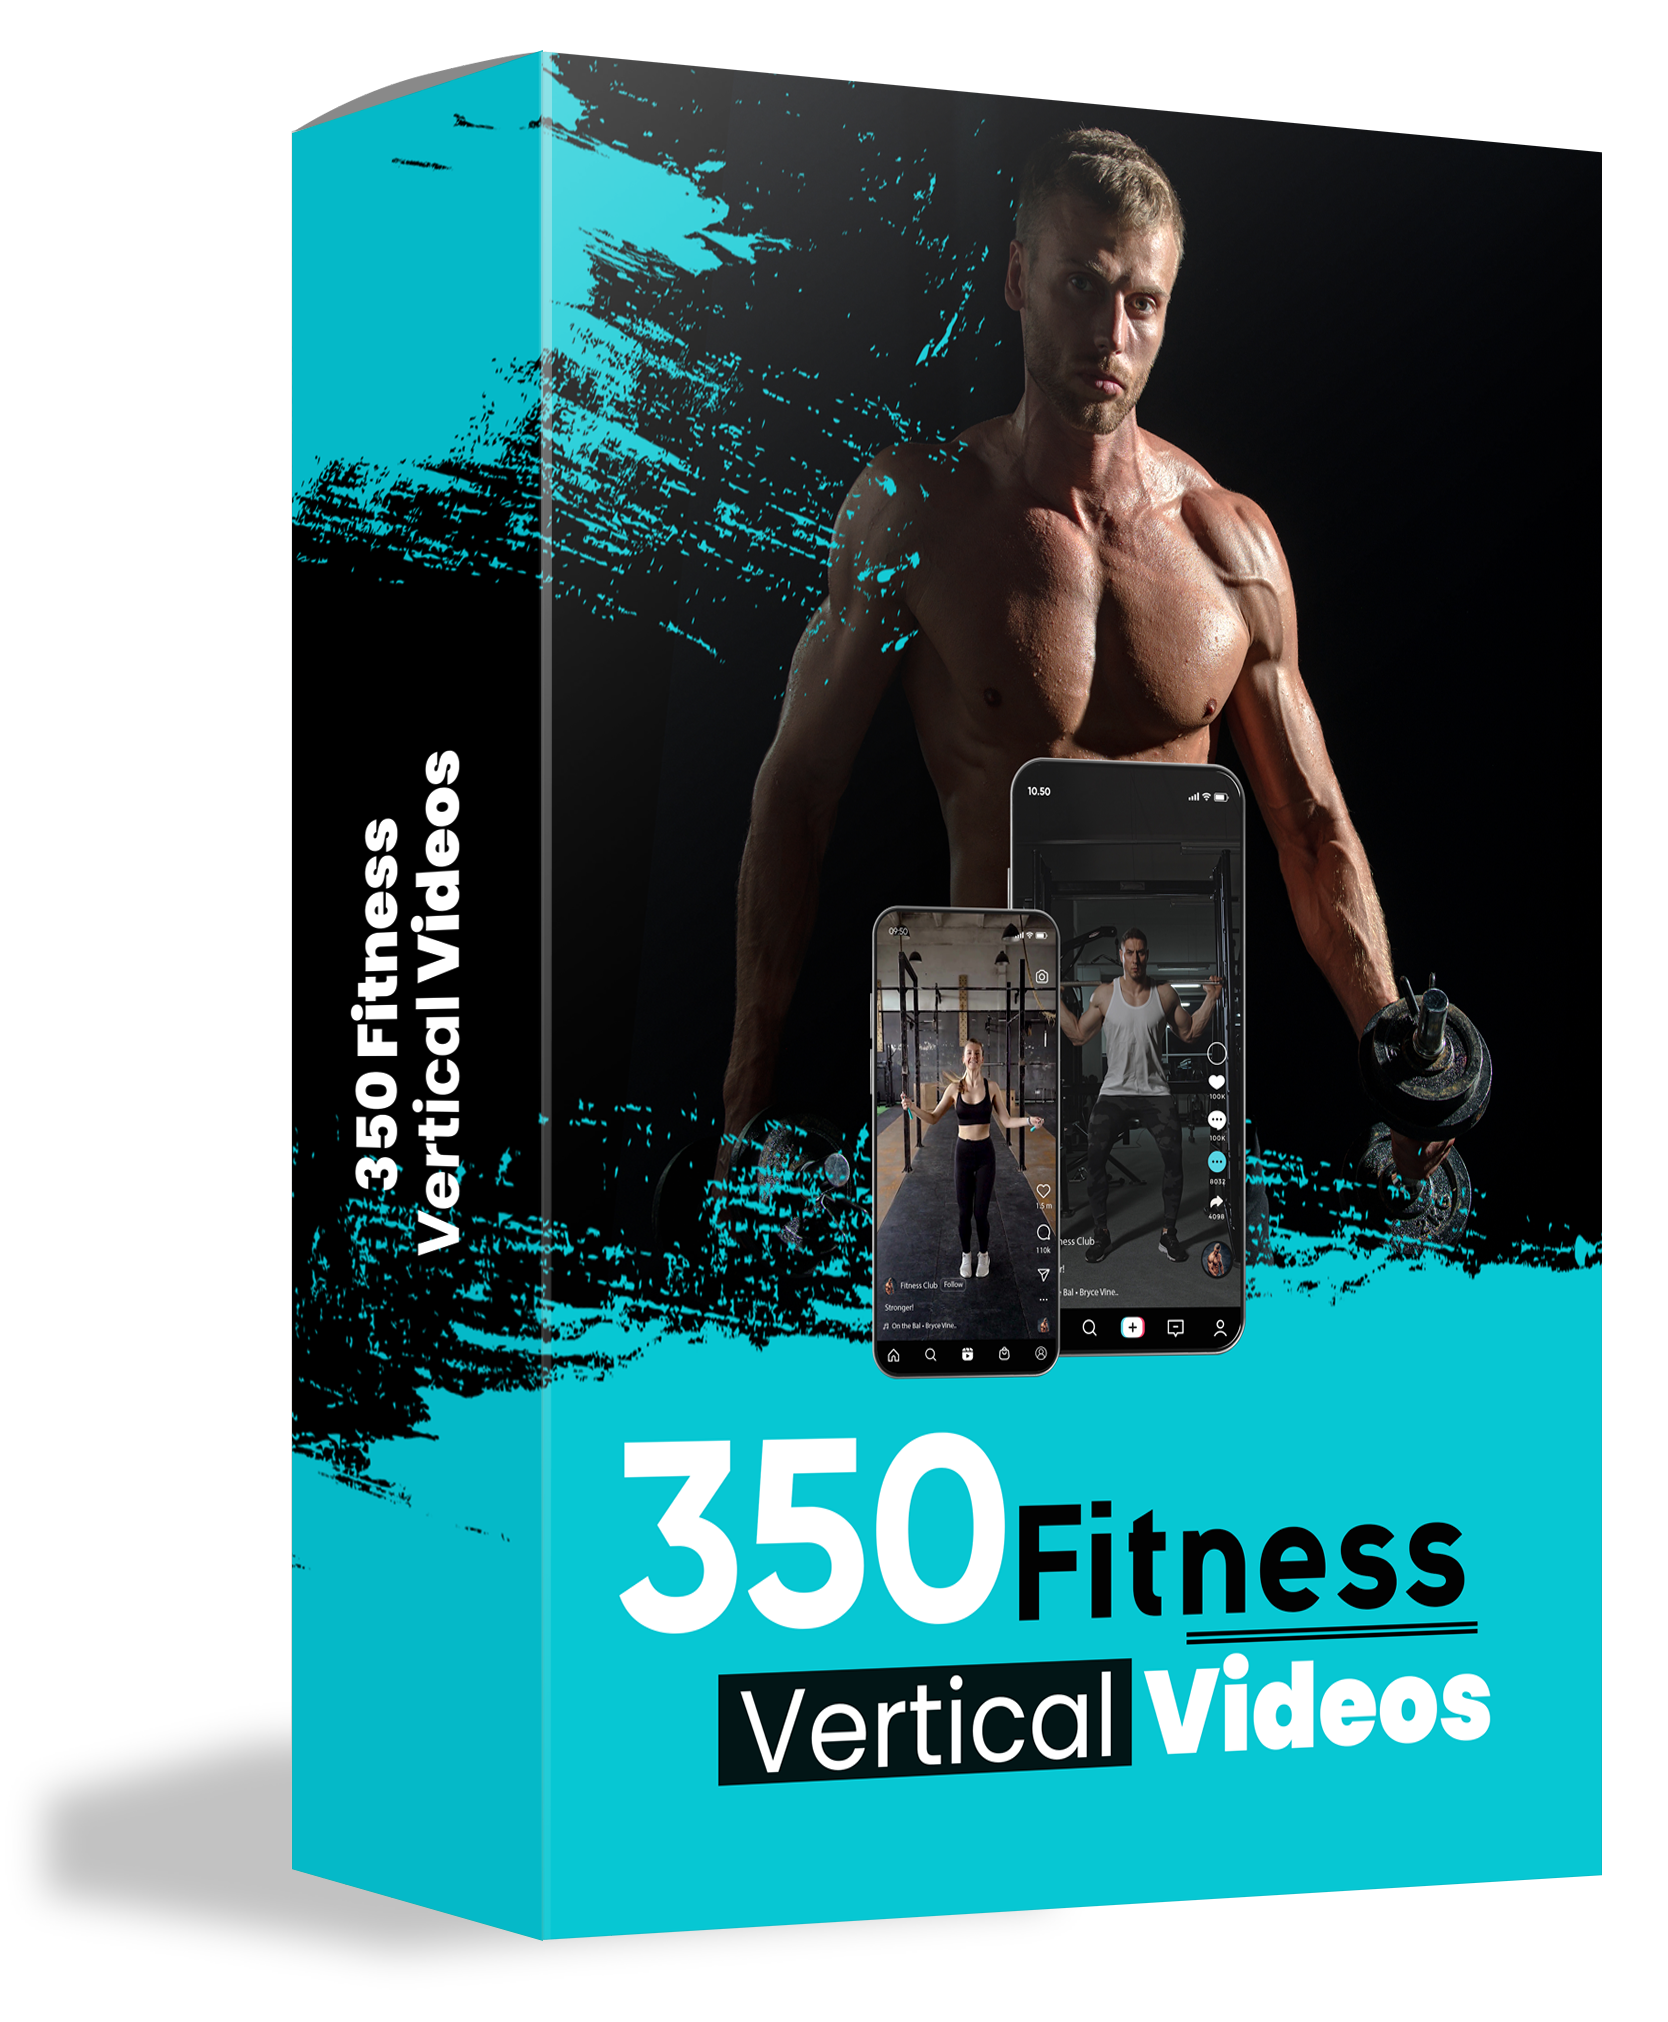 350 vertical videos on fitness